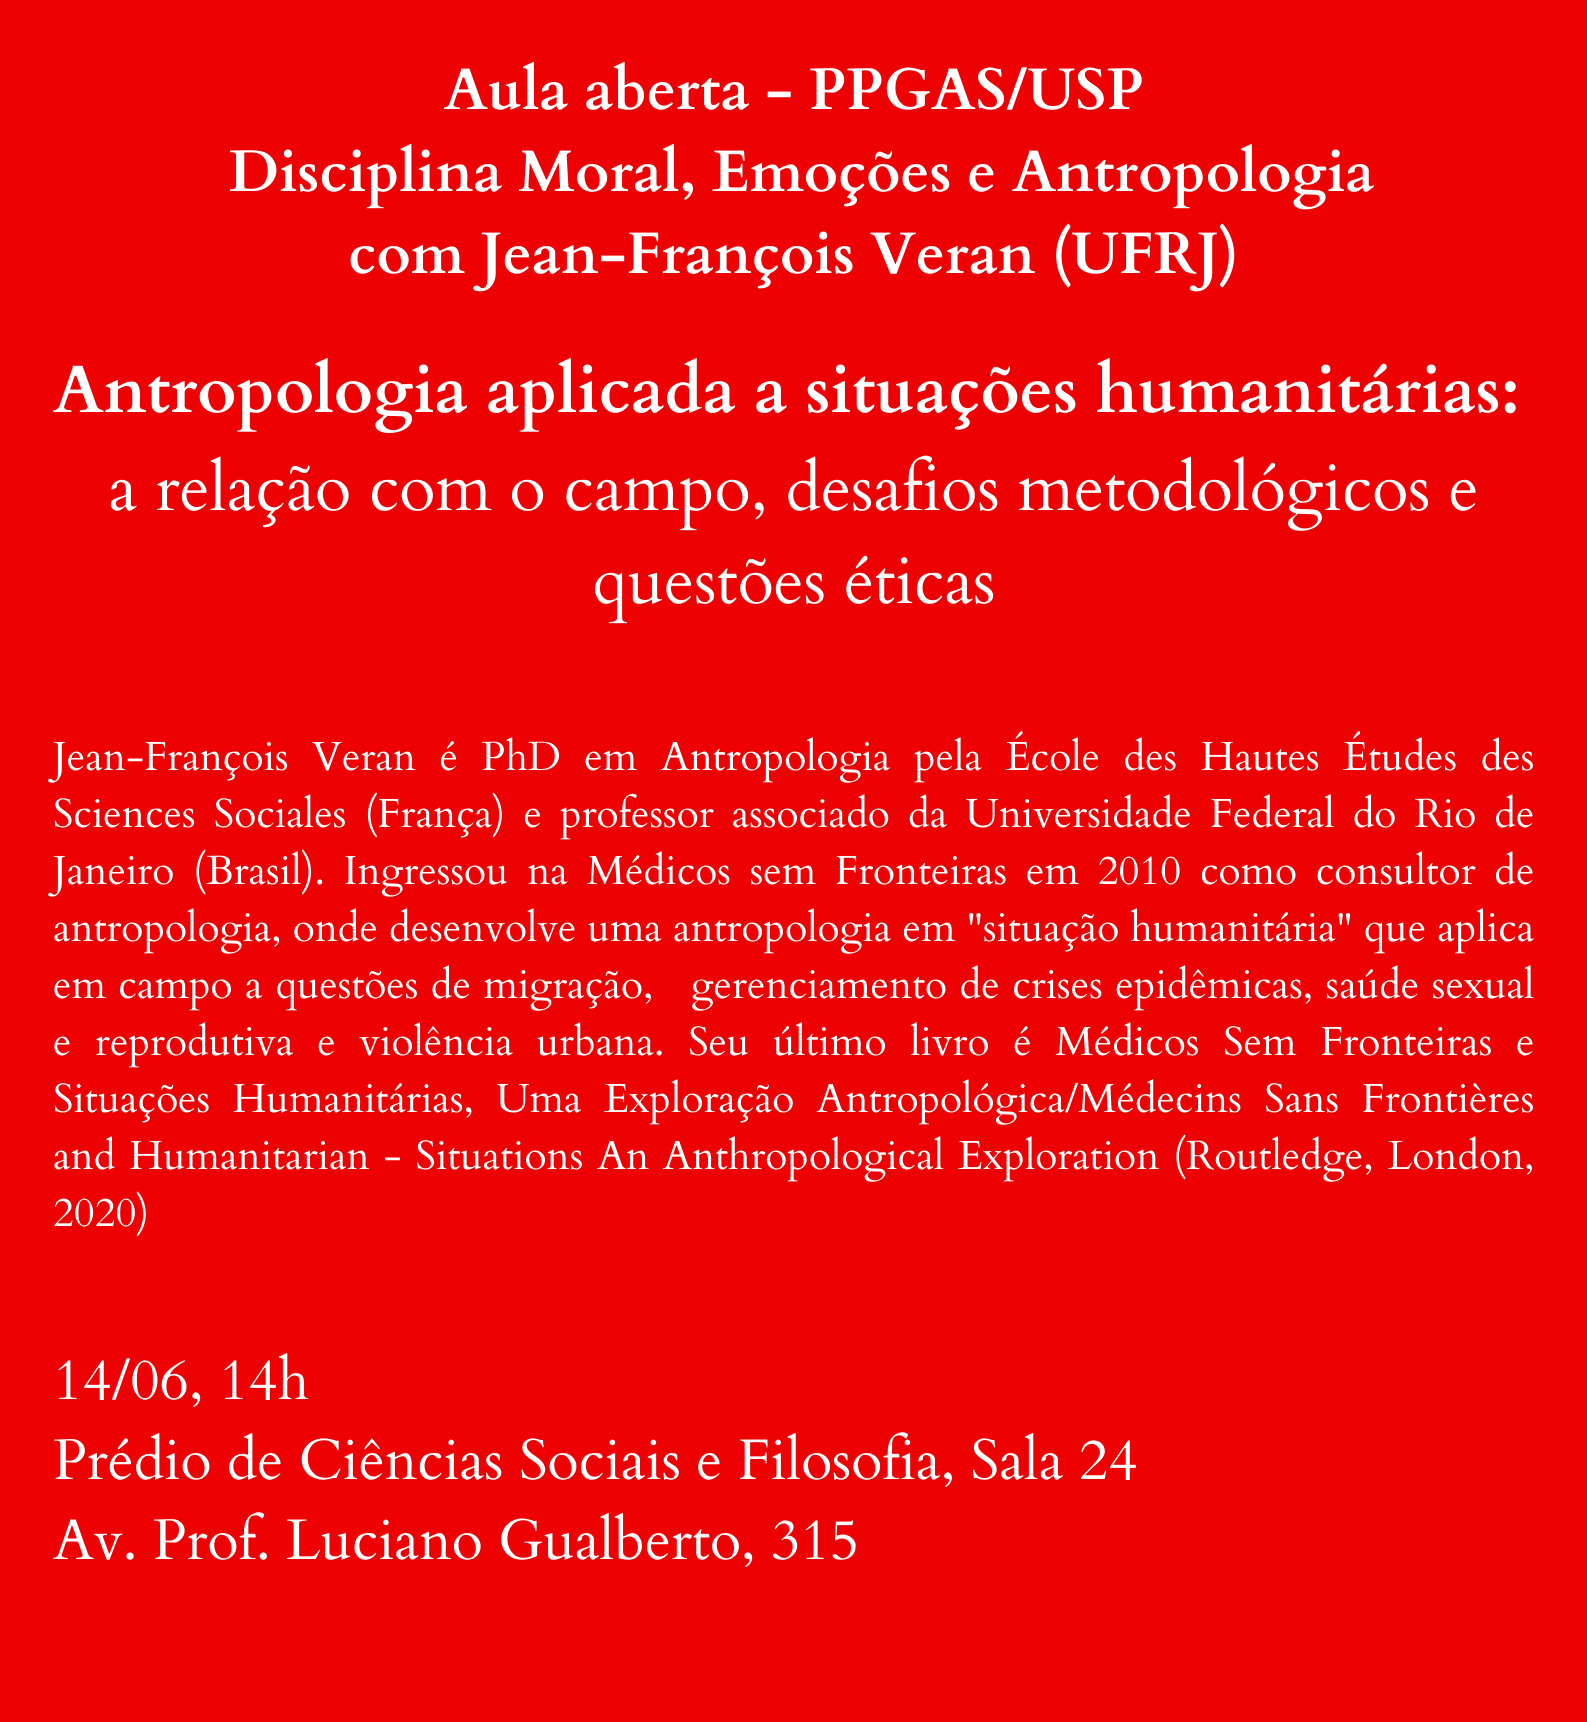 Open Class - 'Anthropology applied to humanitarian situations: the relationship with the field, methodological challenges and ethical issues' with Jean-François Veran